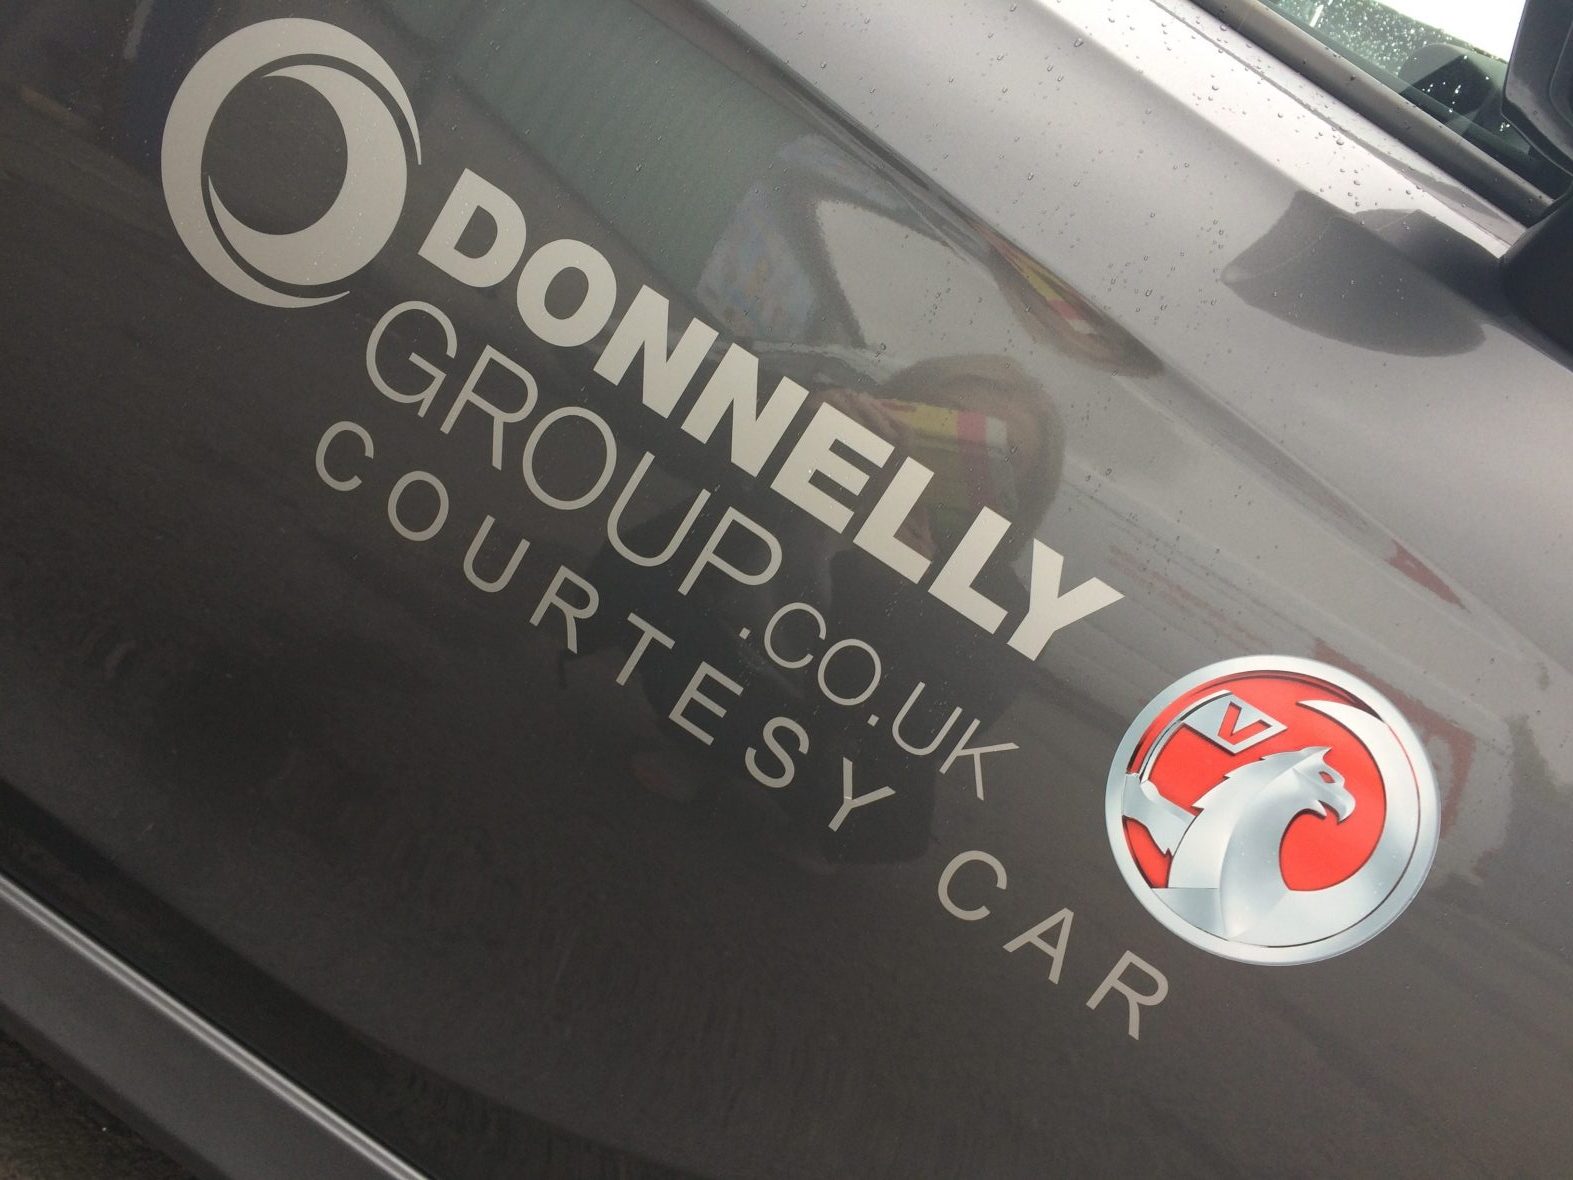 Donnelly Group